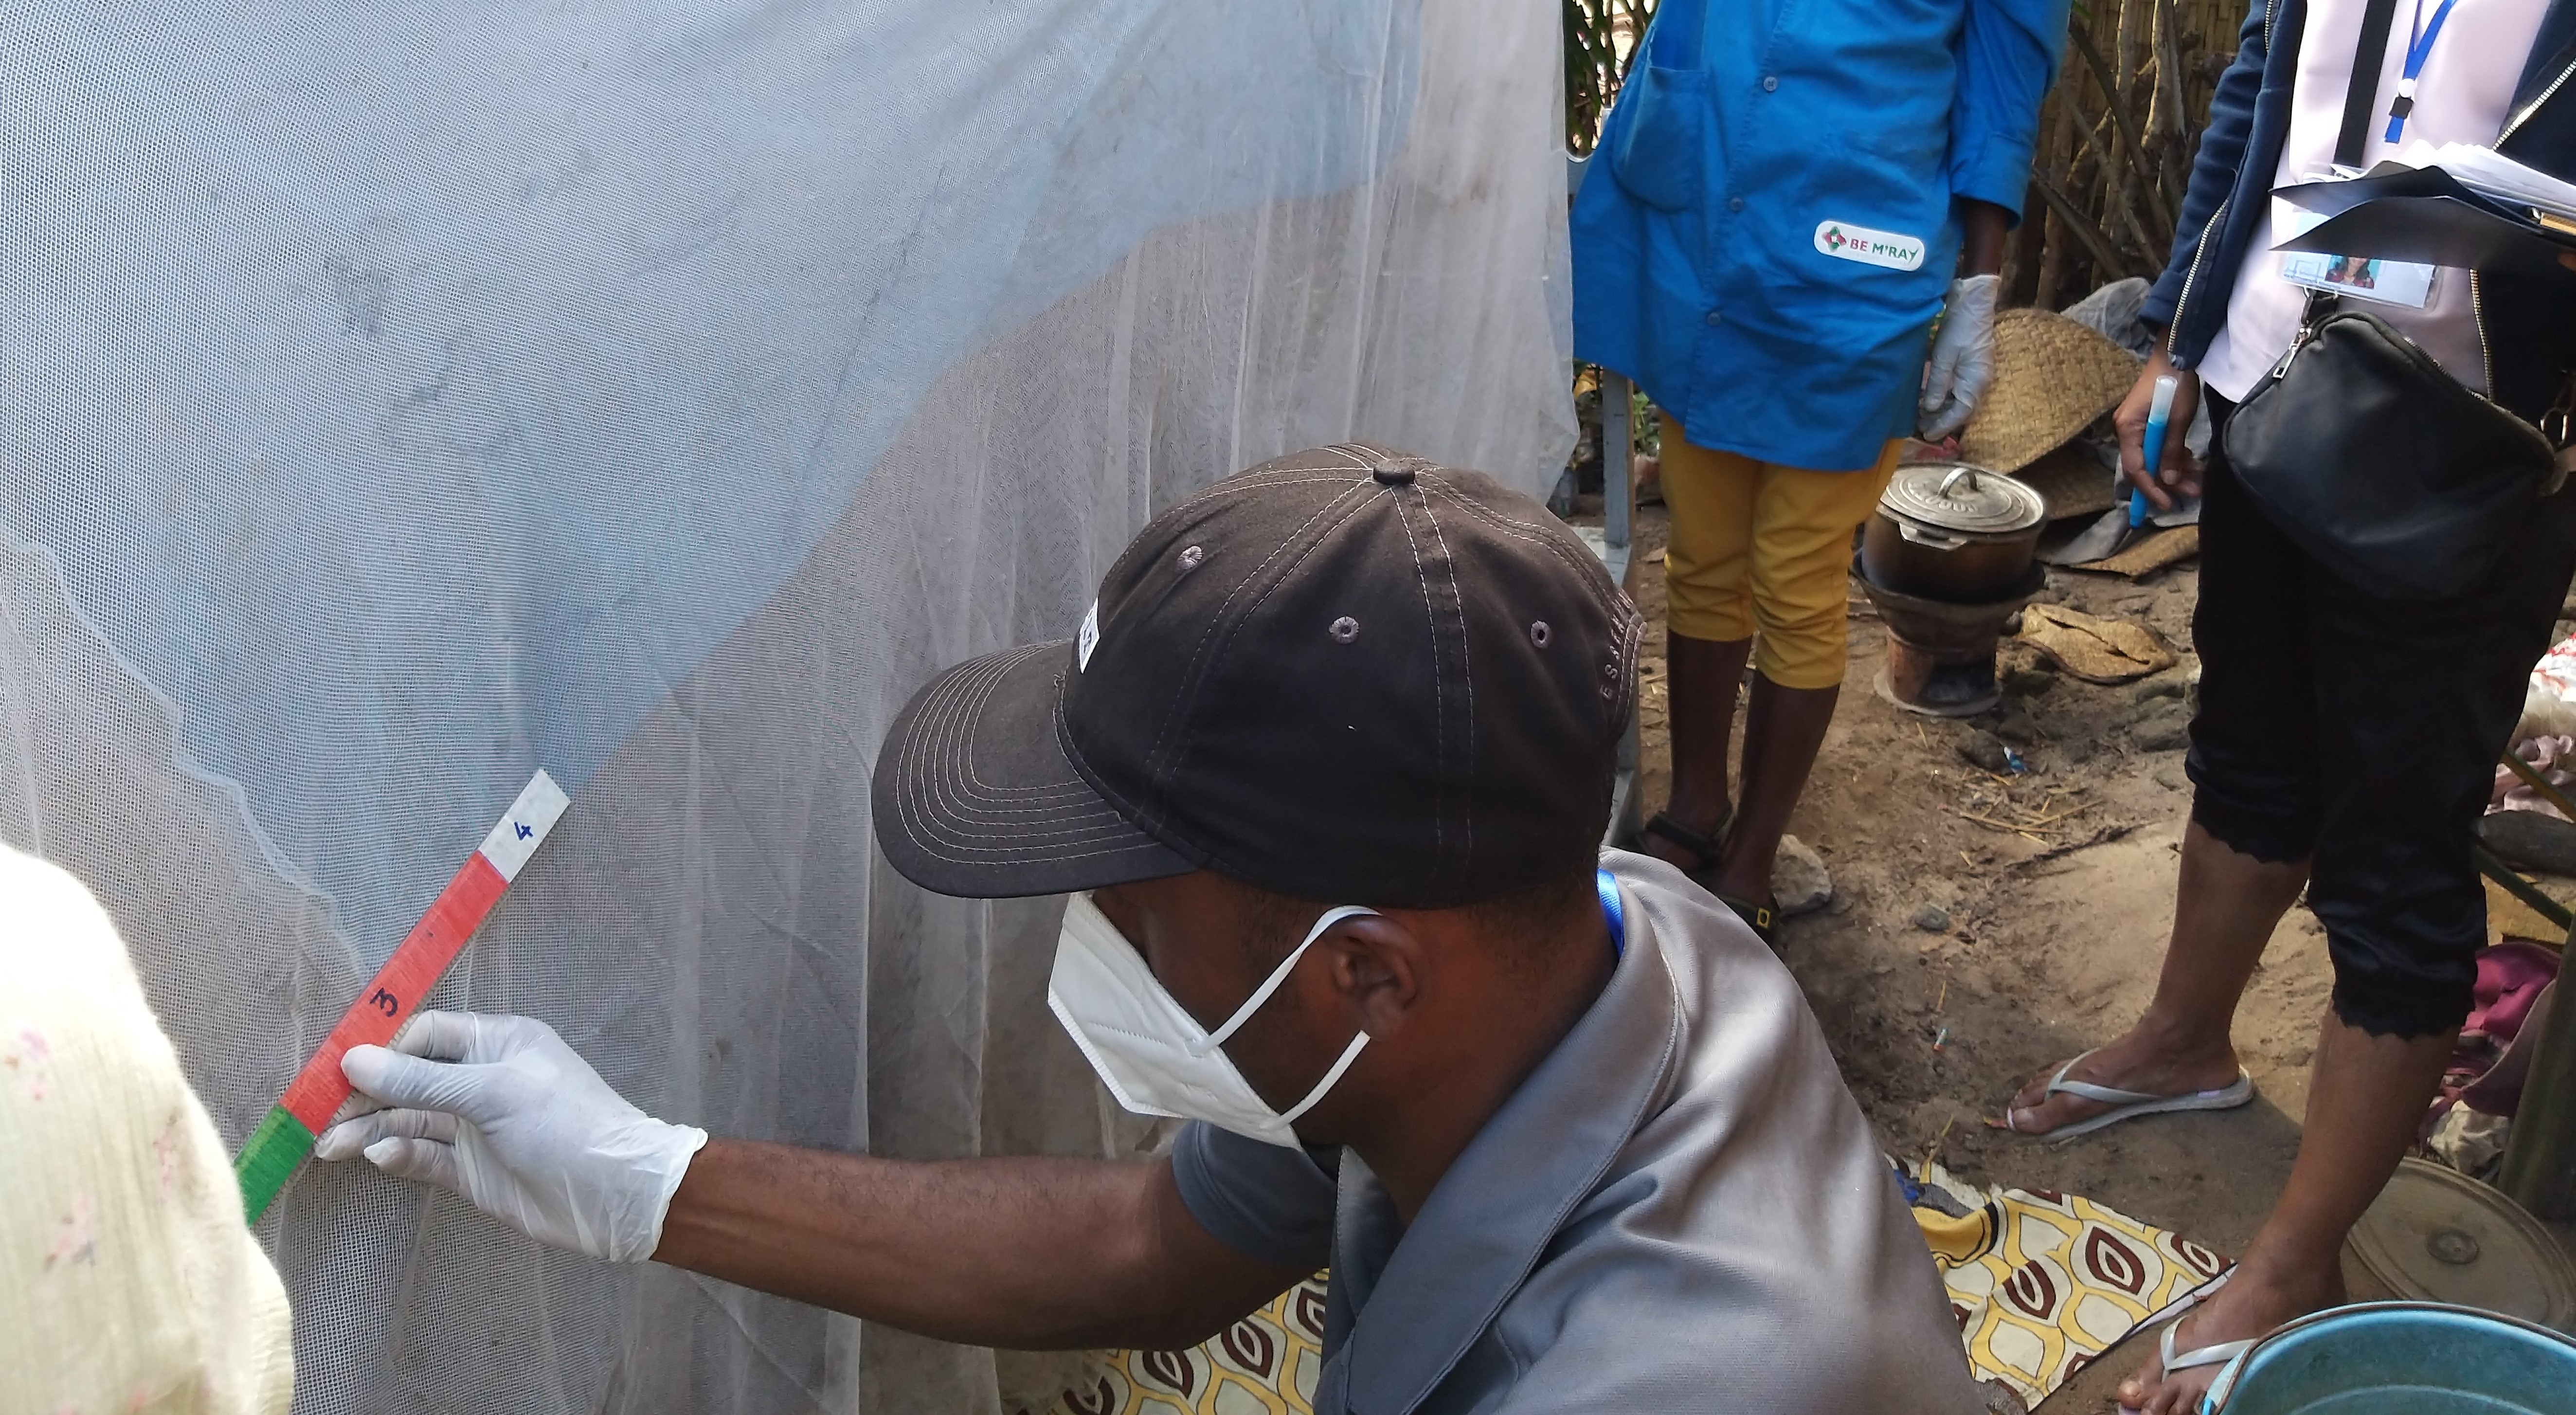 A community health worker in Madagascar’s Toamasina II district holds an ITN while the durability monitoring team identifies and counts holes in the net.